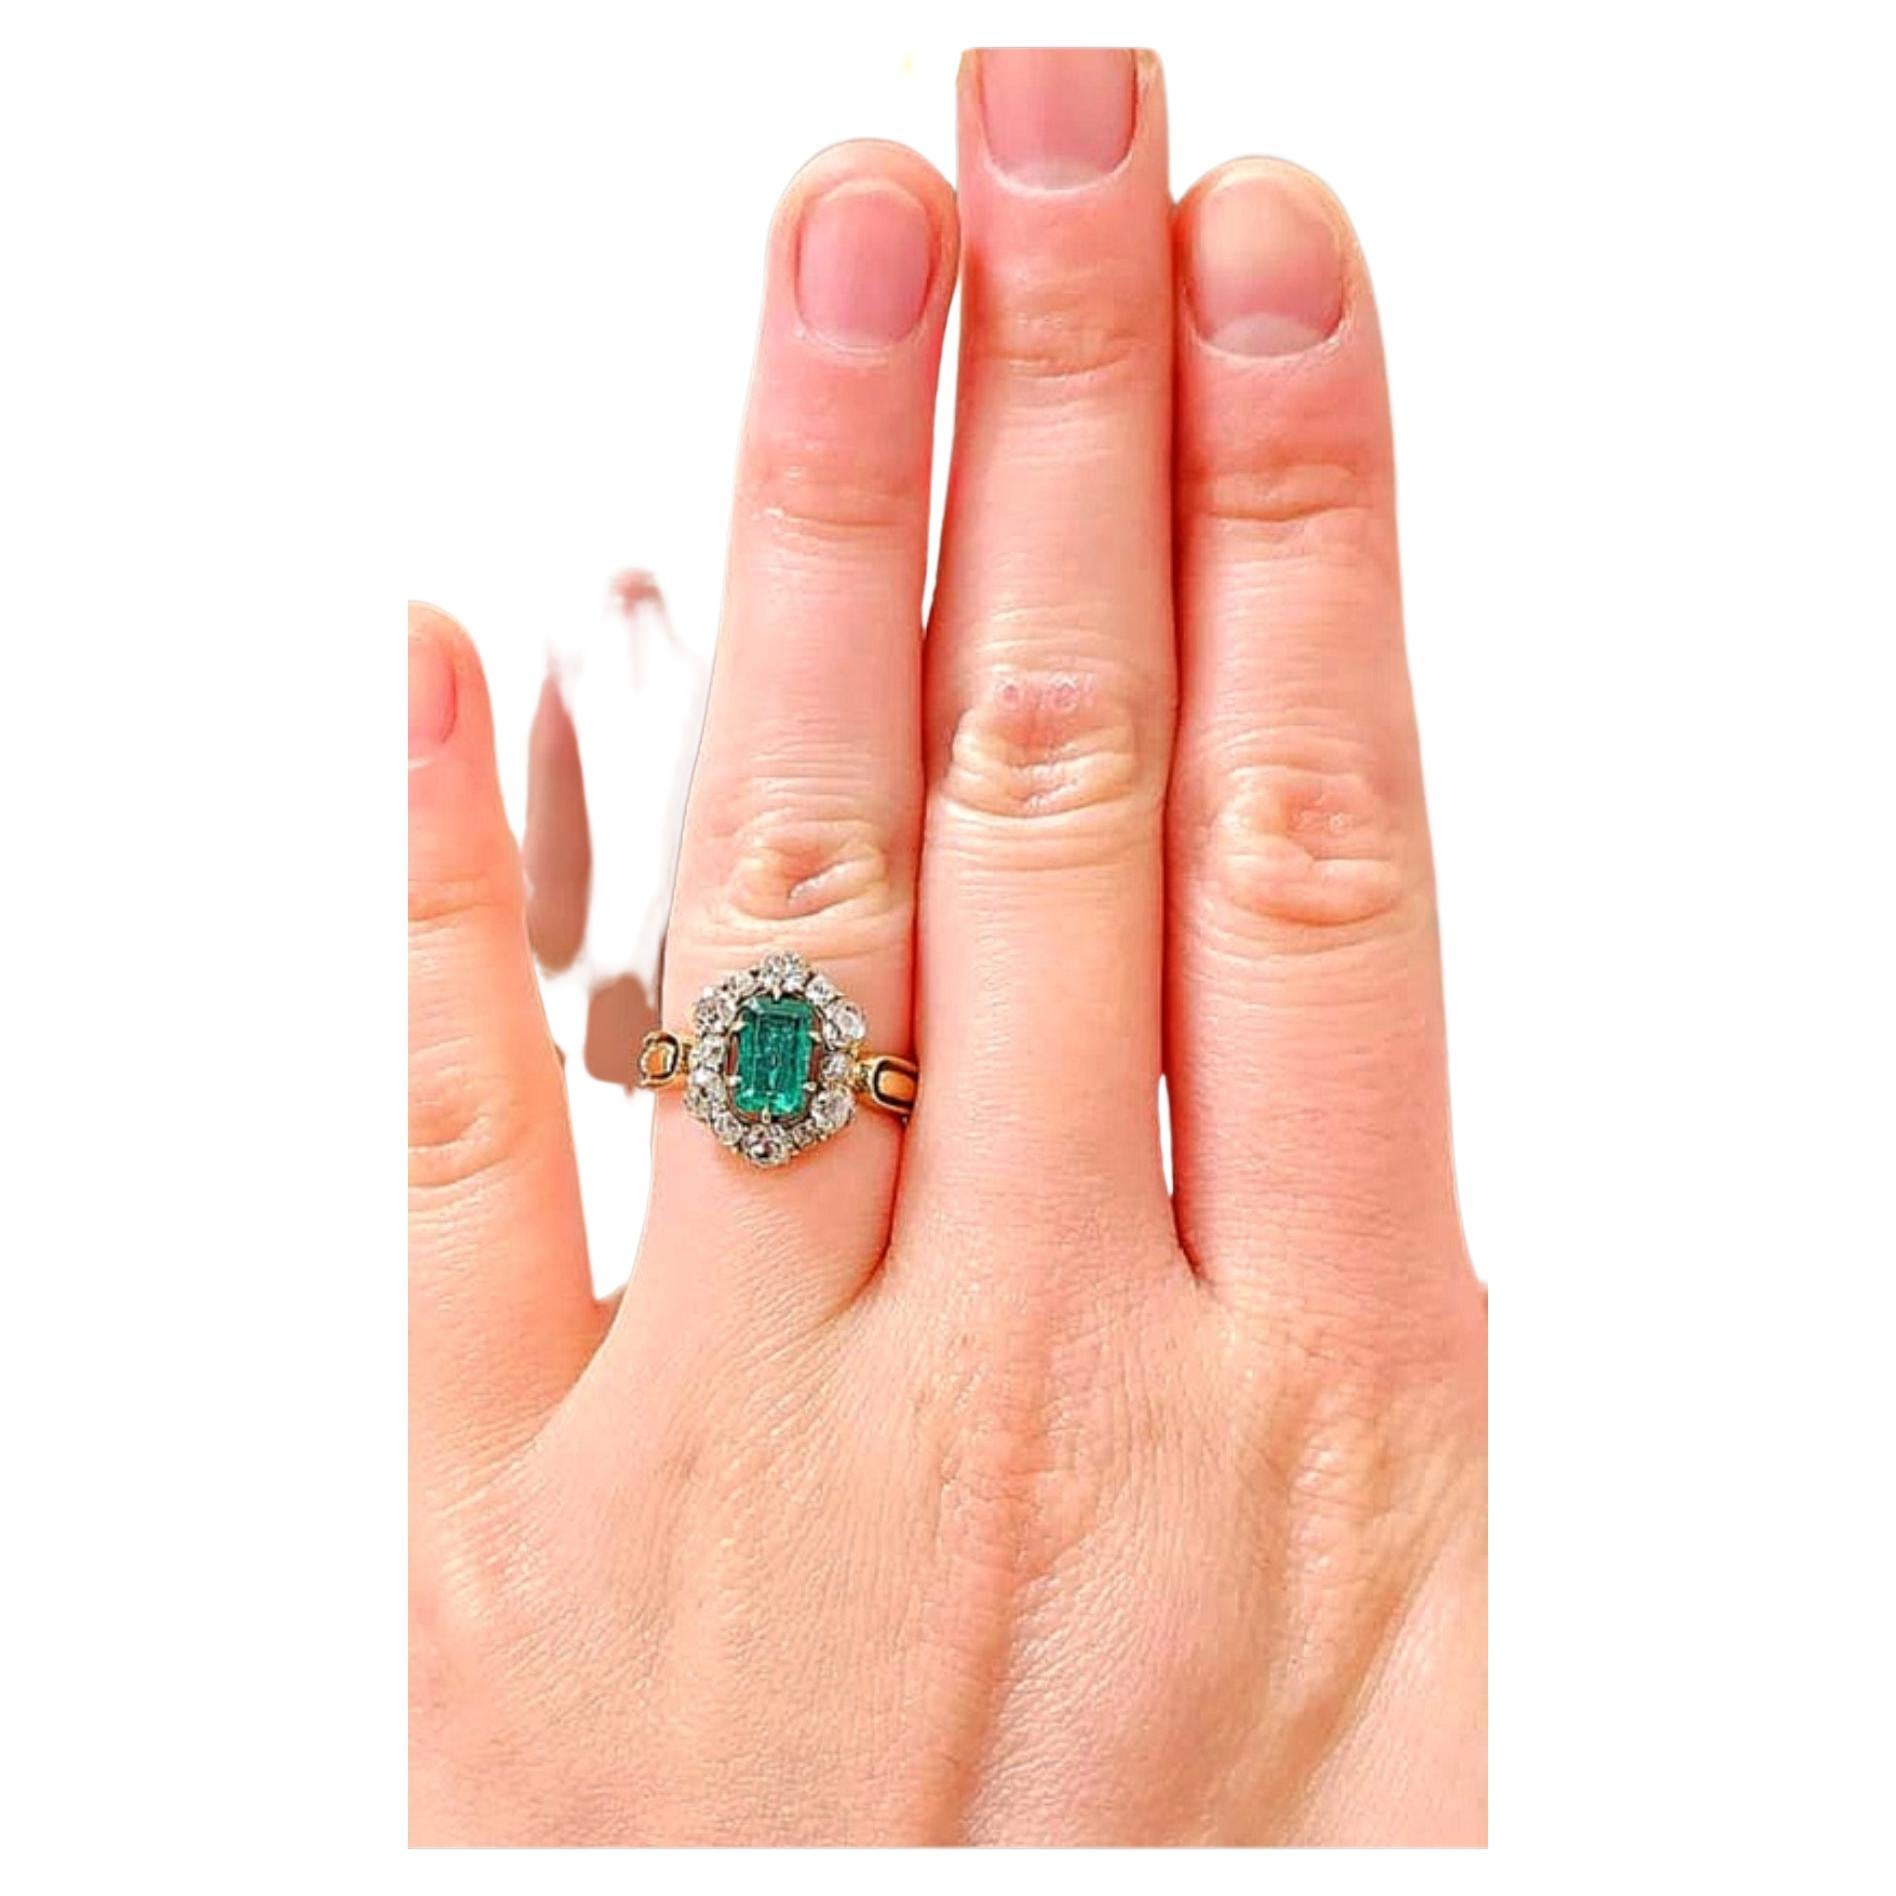 Antique 18k gold ring centered with 1 rich green natural colombian emerald with a stone diameter of 8.45mm flanked with old mine cut diamonds with estimate weight of 1.5 carats H colour vs clearity ring was made in europe betwen 1910.c